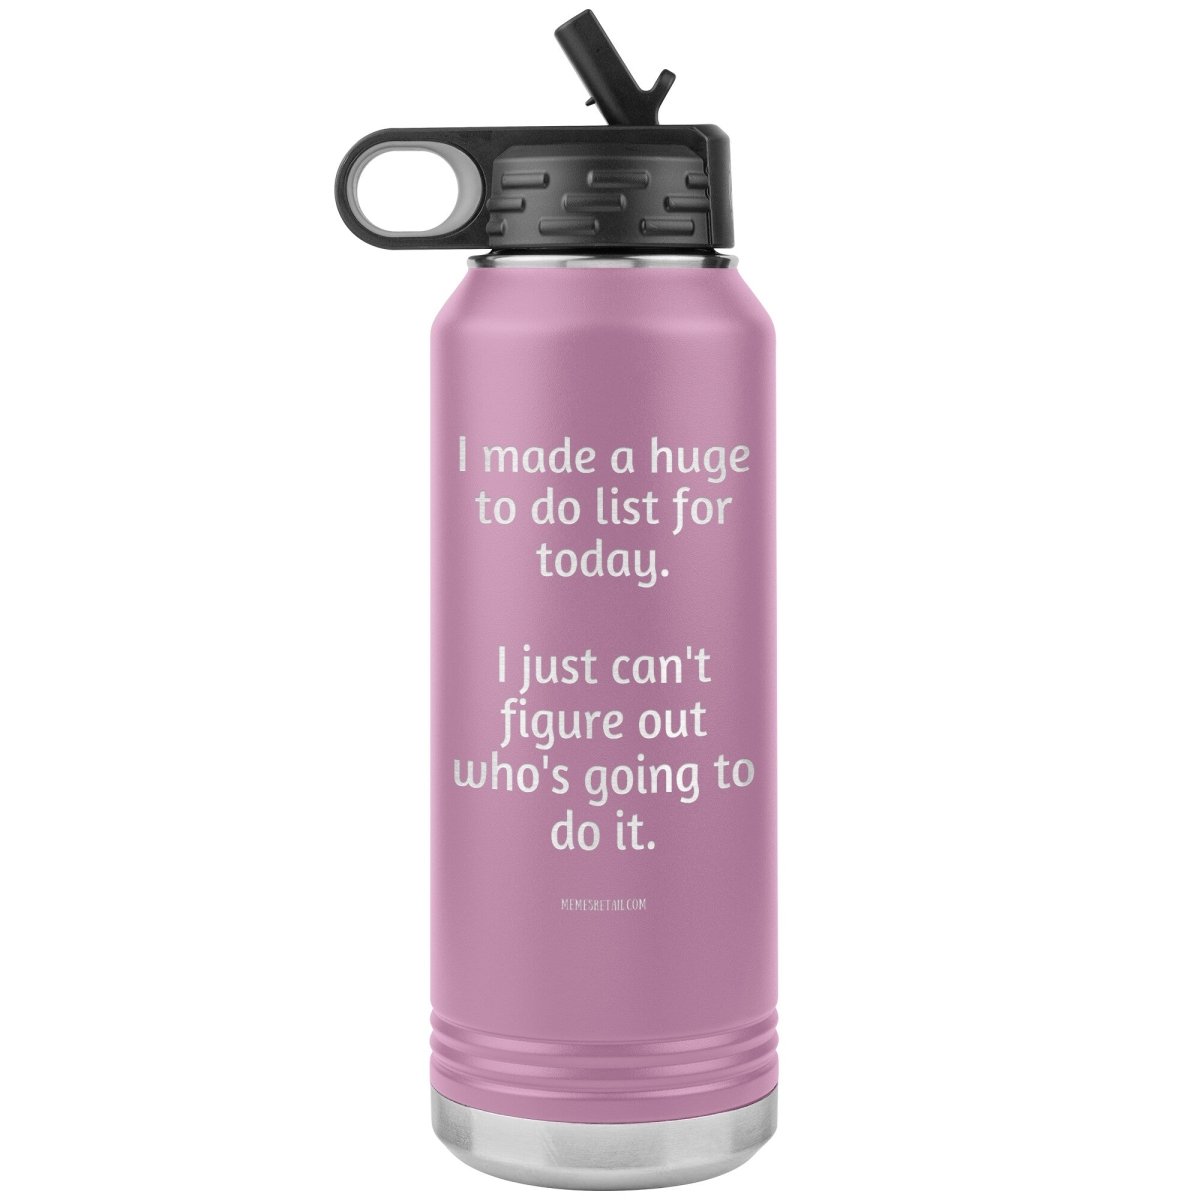 I made a huge to do list for today. I just can't figure out who's going to do it. 32 oz Water Tumbler, Light Purple - MemesRetail.com